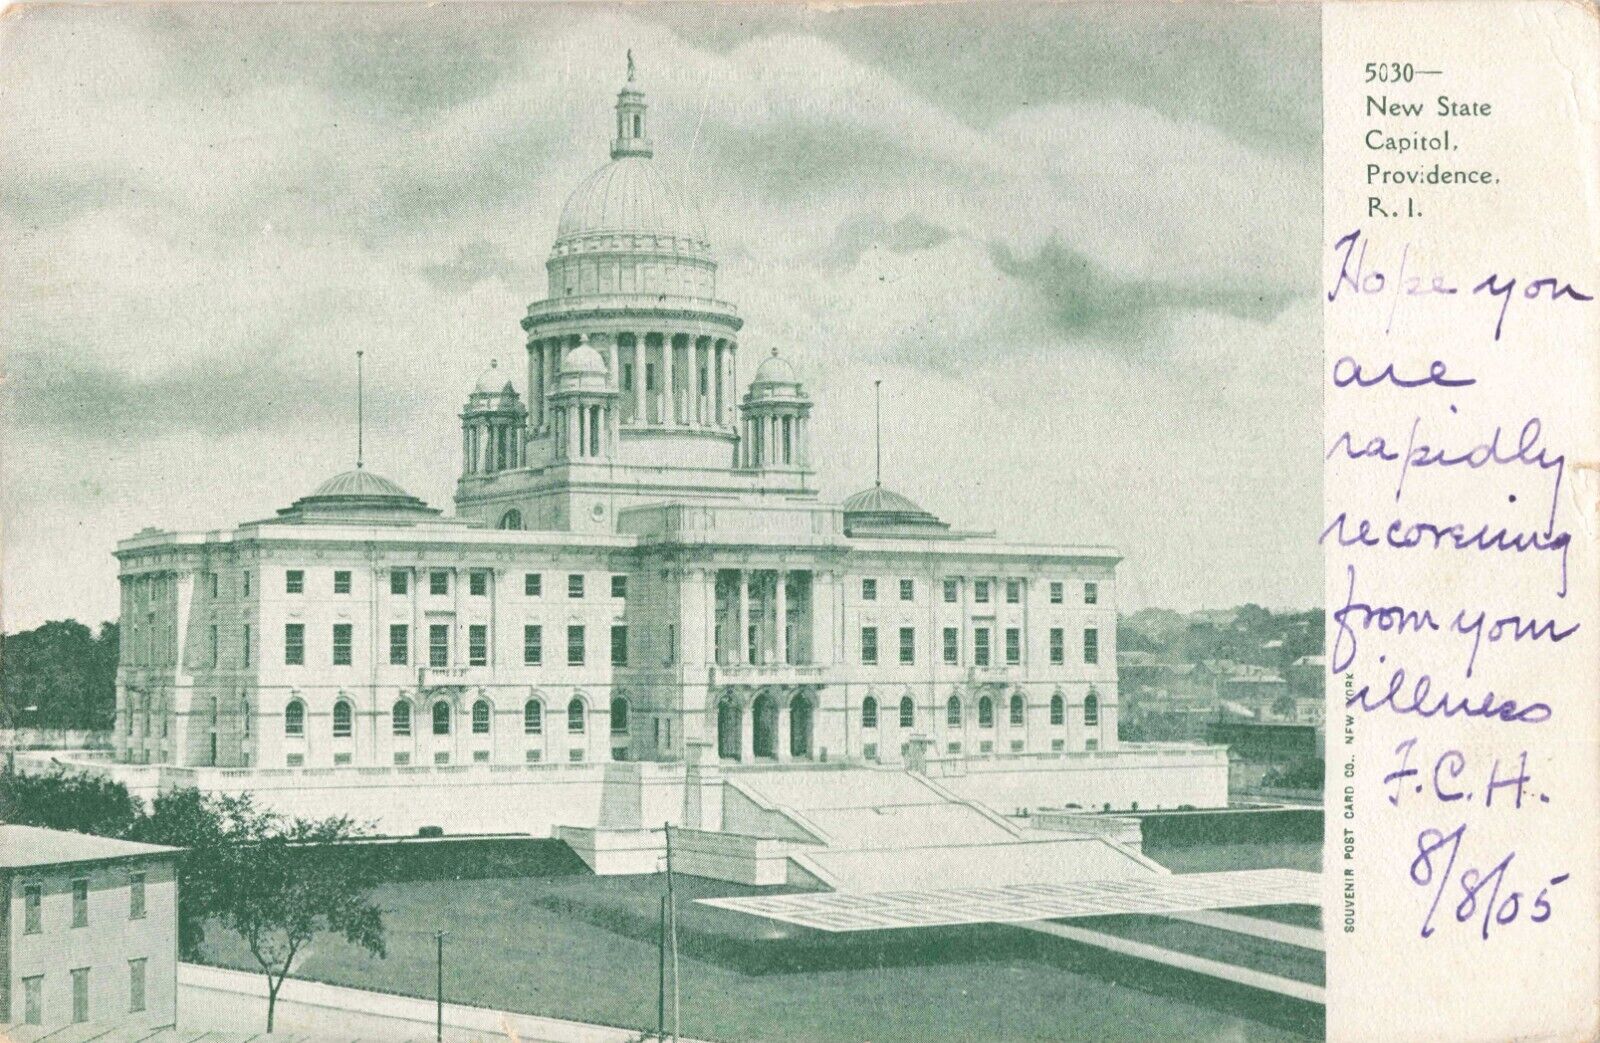 Providence Rhode Island, New State Capitol Building, Vintage Postcard